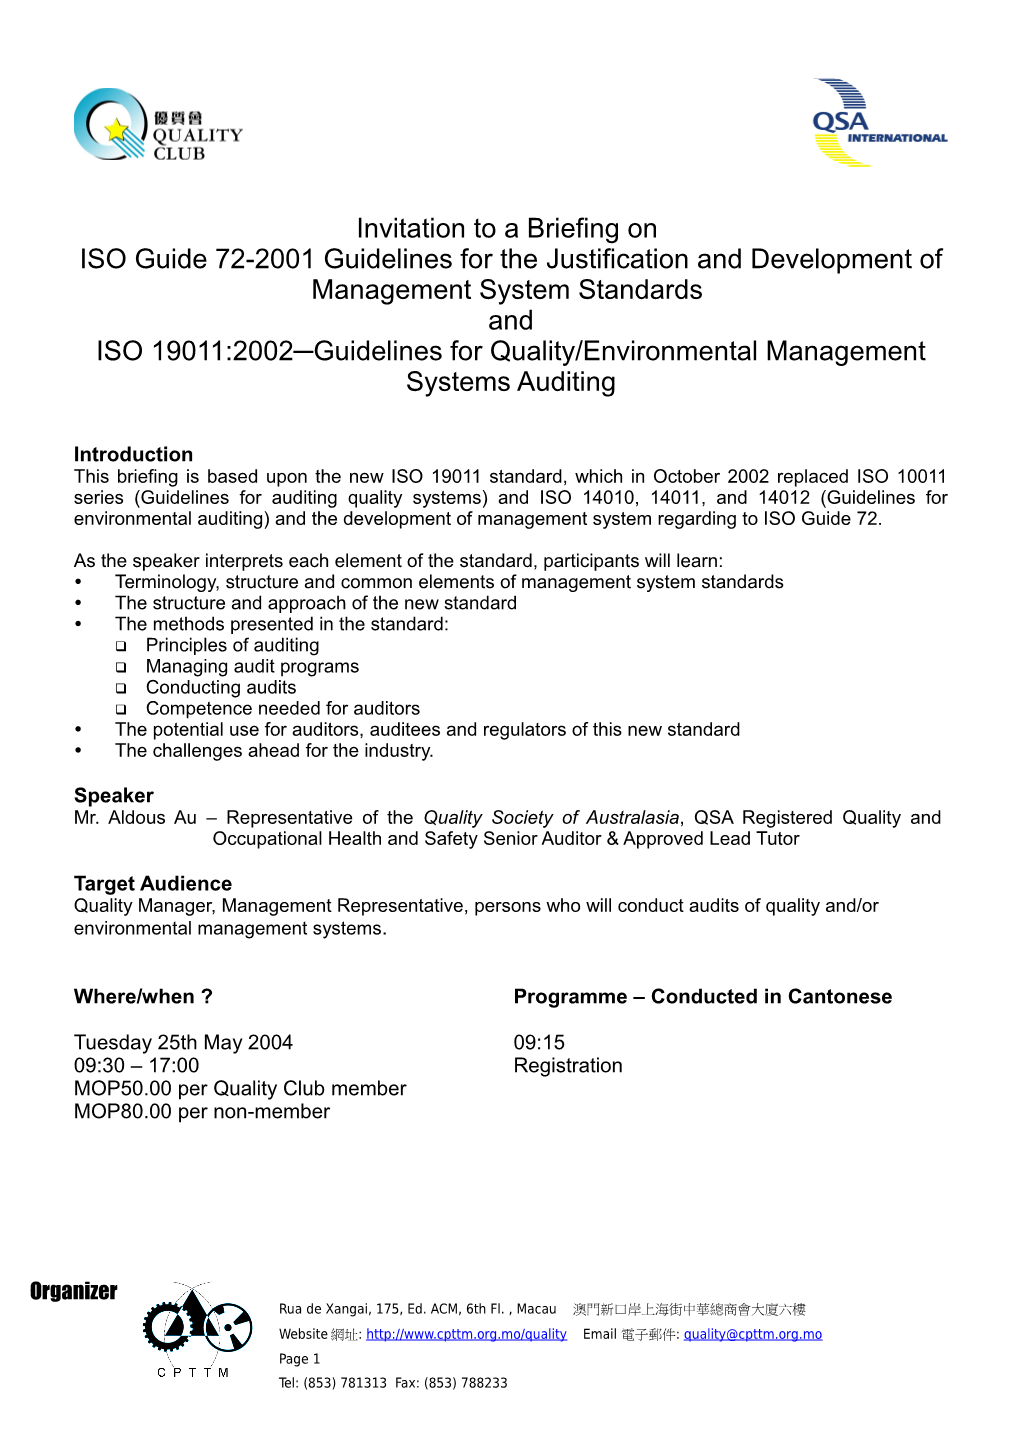 ISO Guide 72-2001 Guidelines for the Justification and Development of Management System